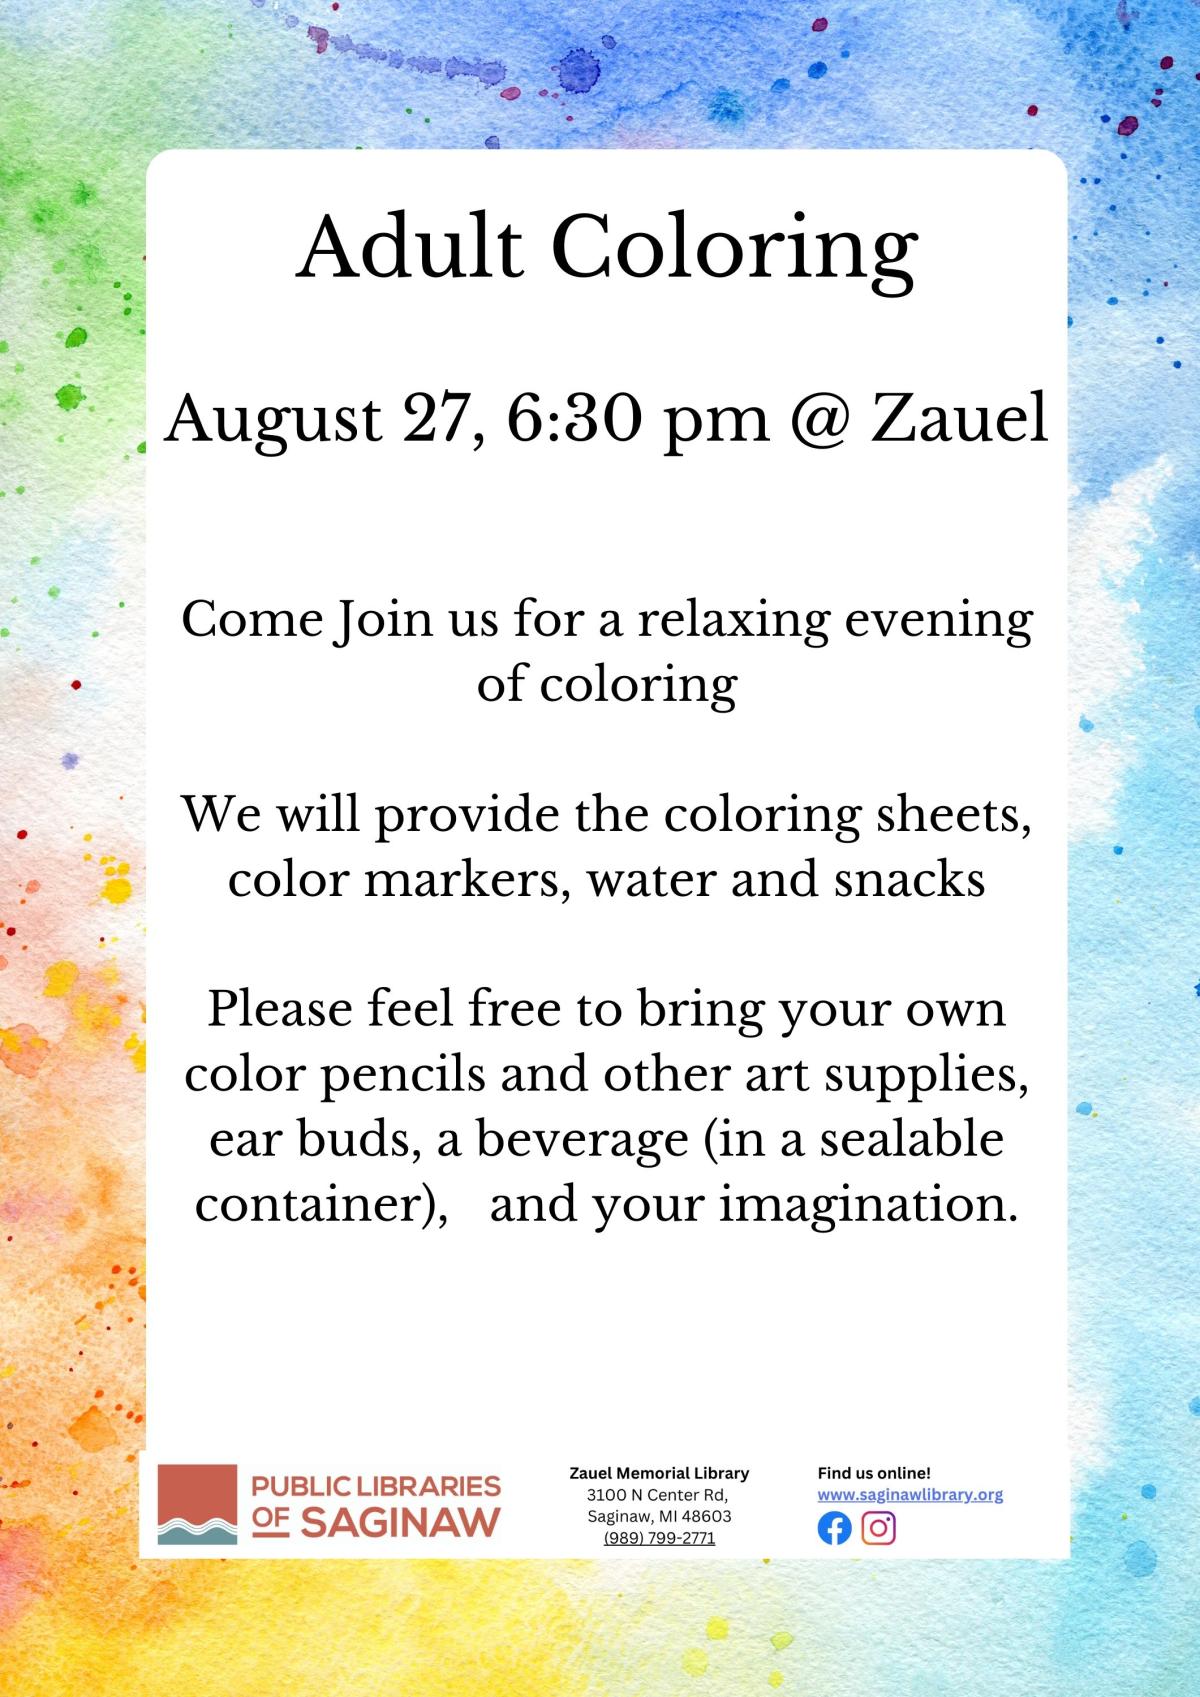 Adult Coloring flyer